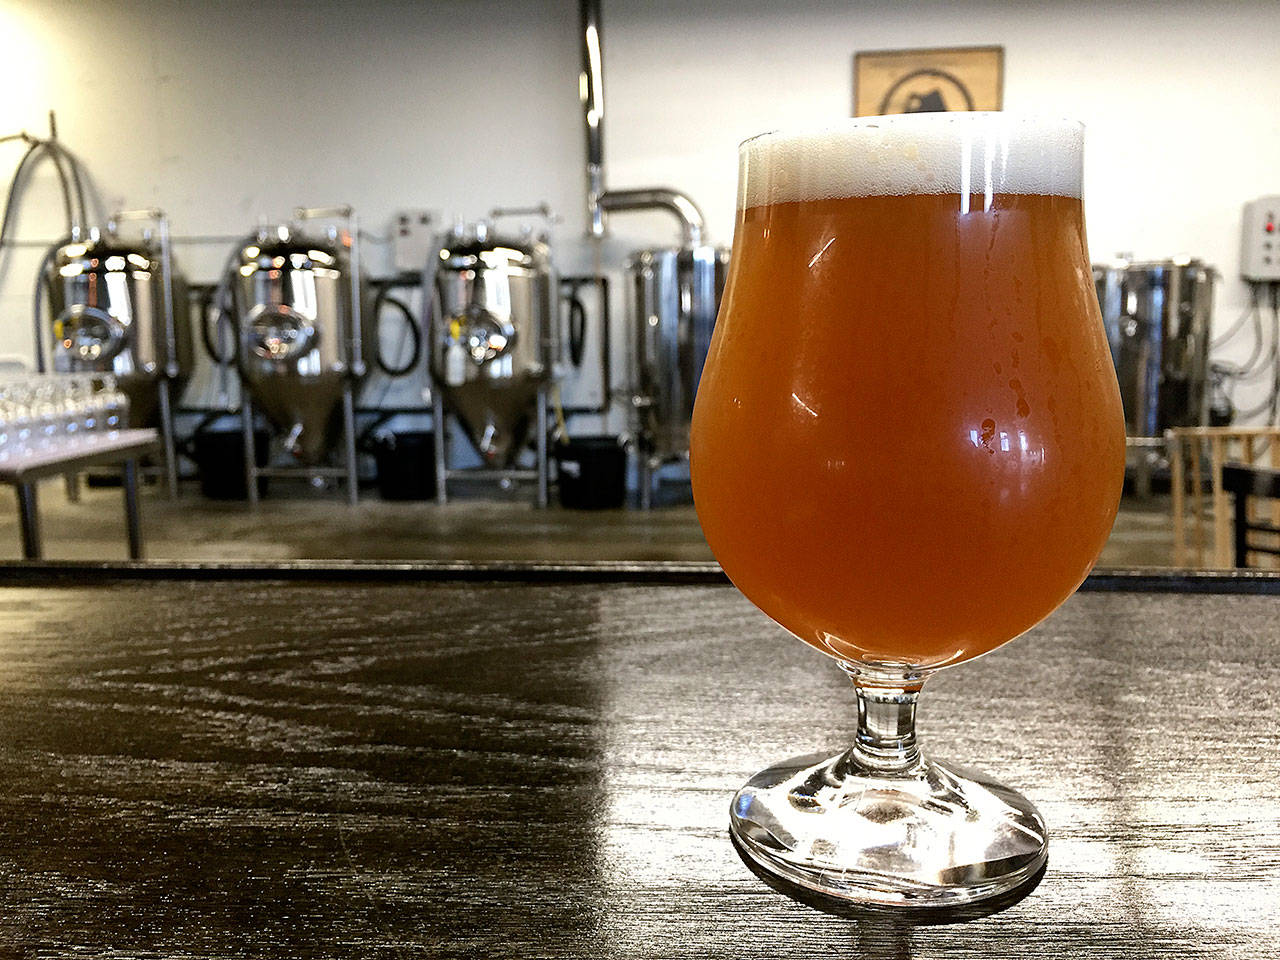 The Chicago Typewriter is a New England-style IPA made with Falconer 7, Mosaic and Citra hops. (Photo by Aaron Swaney)